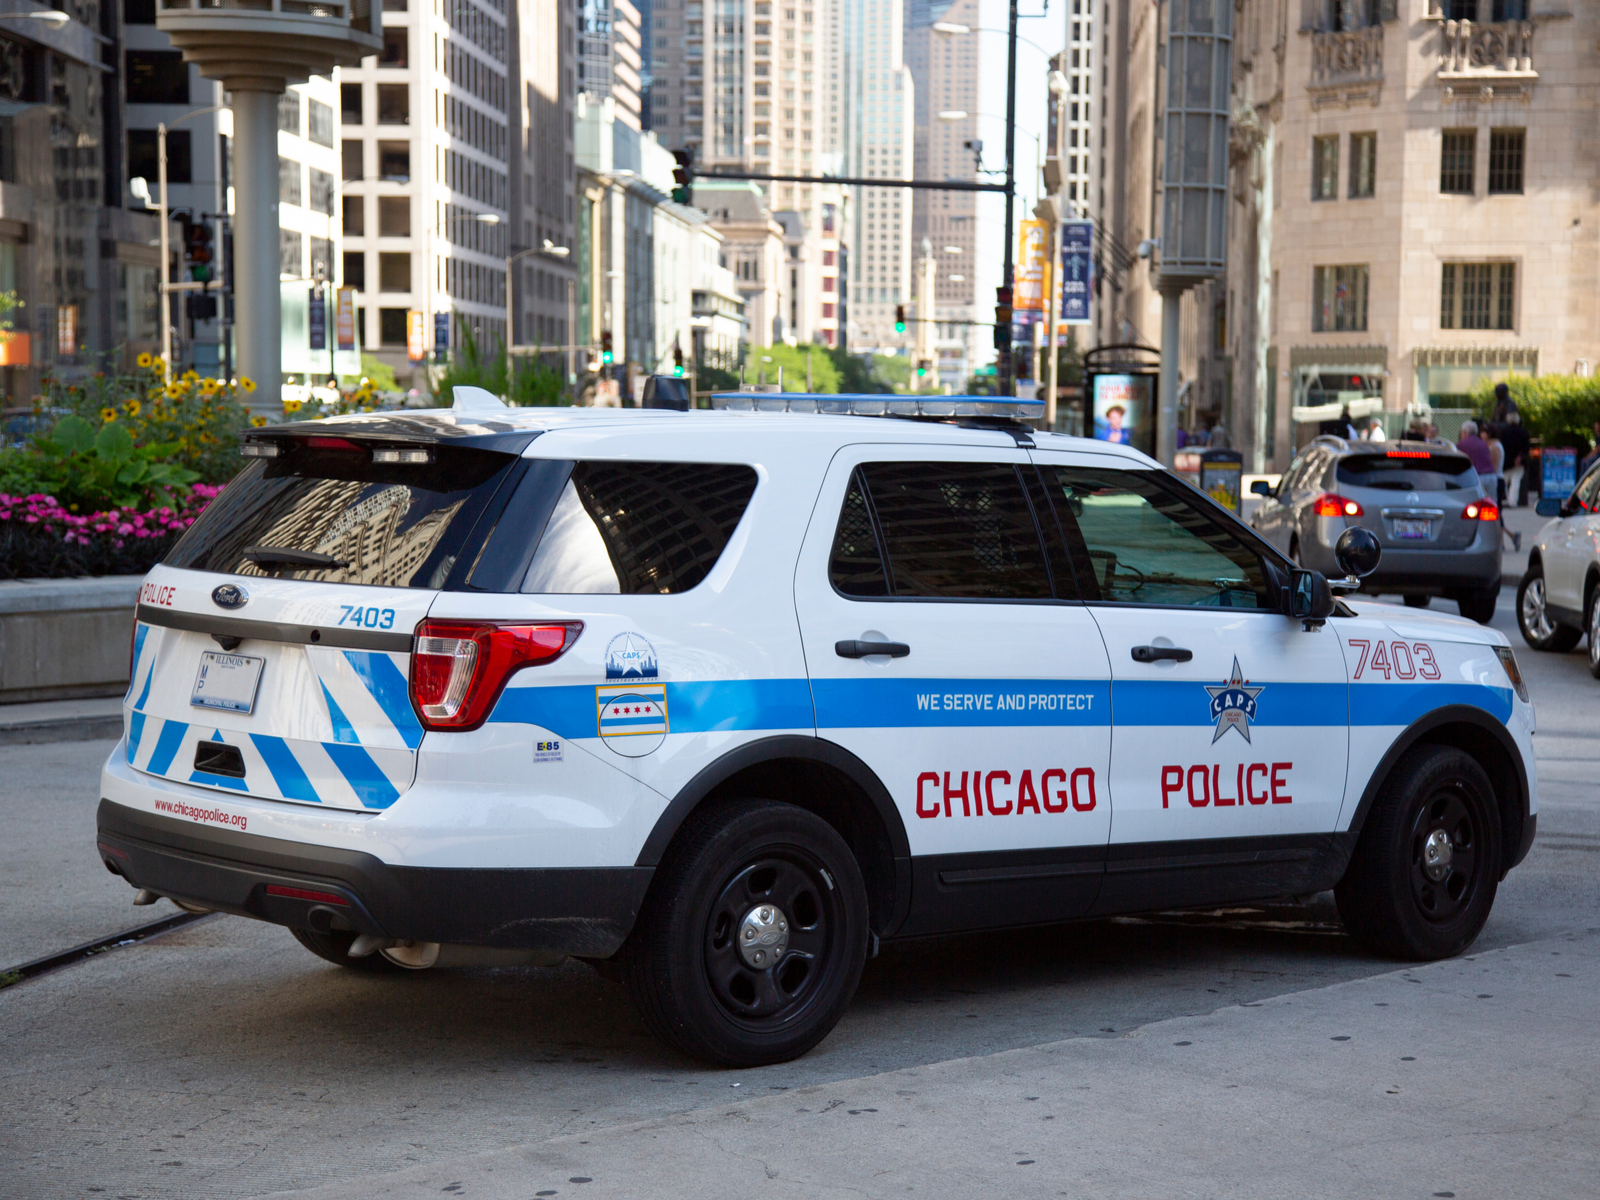 For a post on Is Chicago Safe, a police car on the Inner Loop